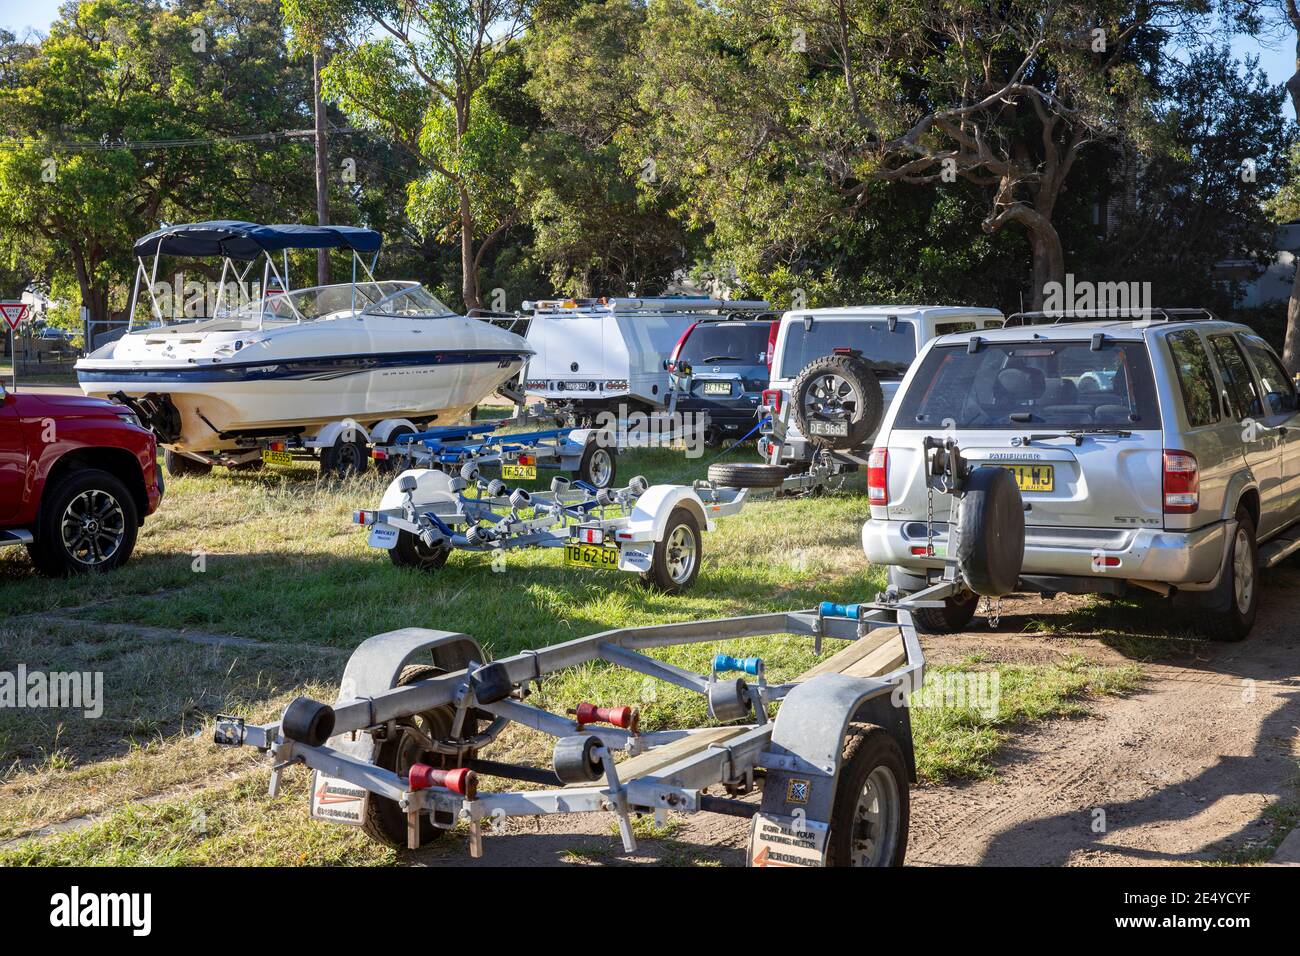 Palm Beach Sydney designated council parking area only for those with boat trailers,Sydney,Australia assists owners to launch their boats Stock Photo